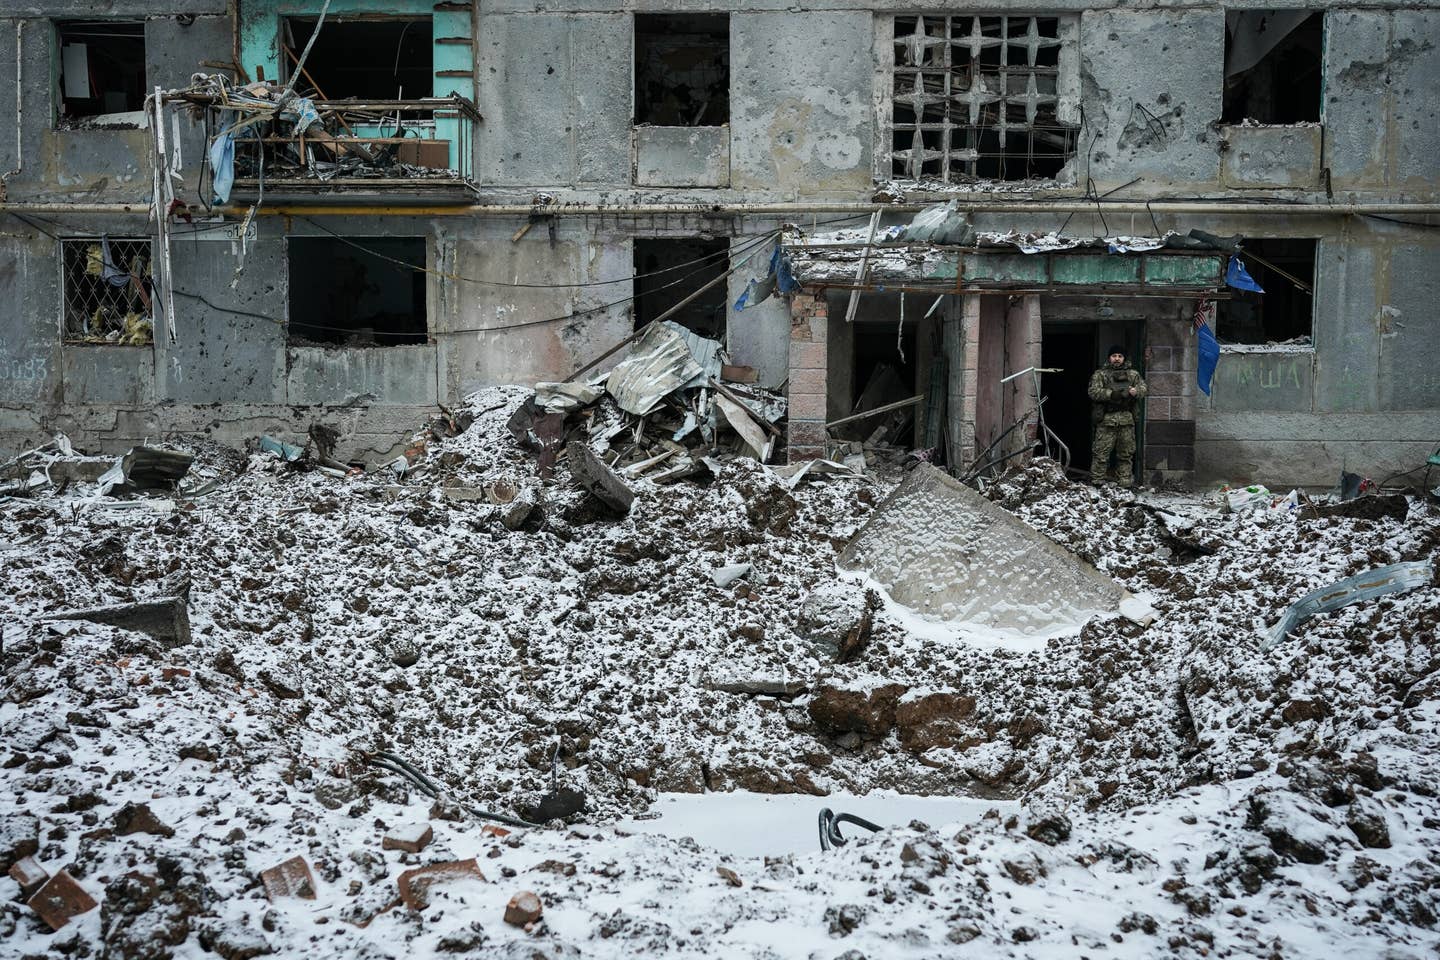 A Ukrainian soldier stands near the entrance to a destroyed residential building in Bakhmut. (Photo by Serhii Mykhalchuk/Global Images Ukraine via Getty Images)